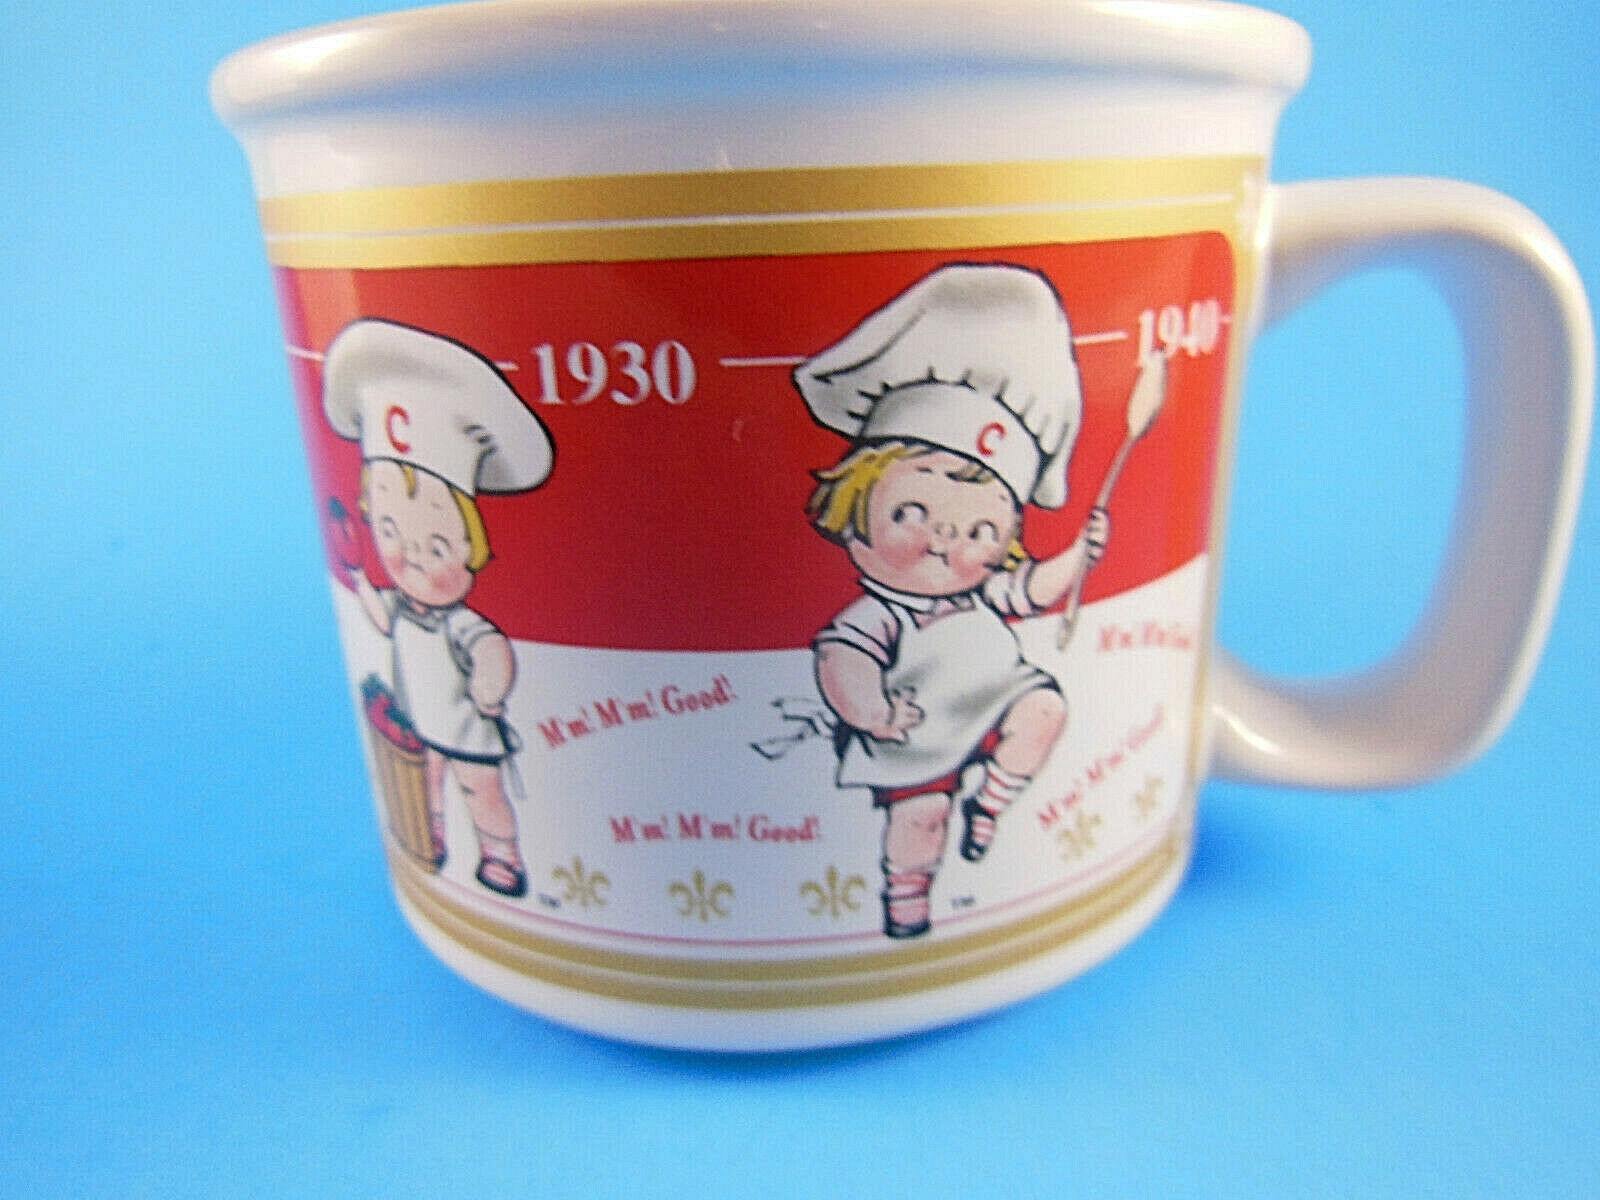 Campbell's Soup 1910-40 design Mug Bowl Cup 2001 Houston Harvest Gift Products - $7.91